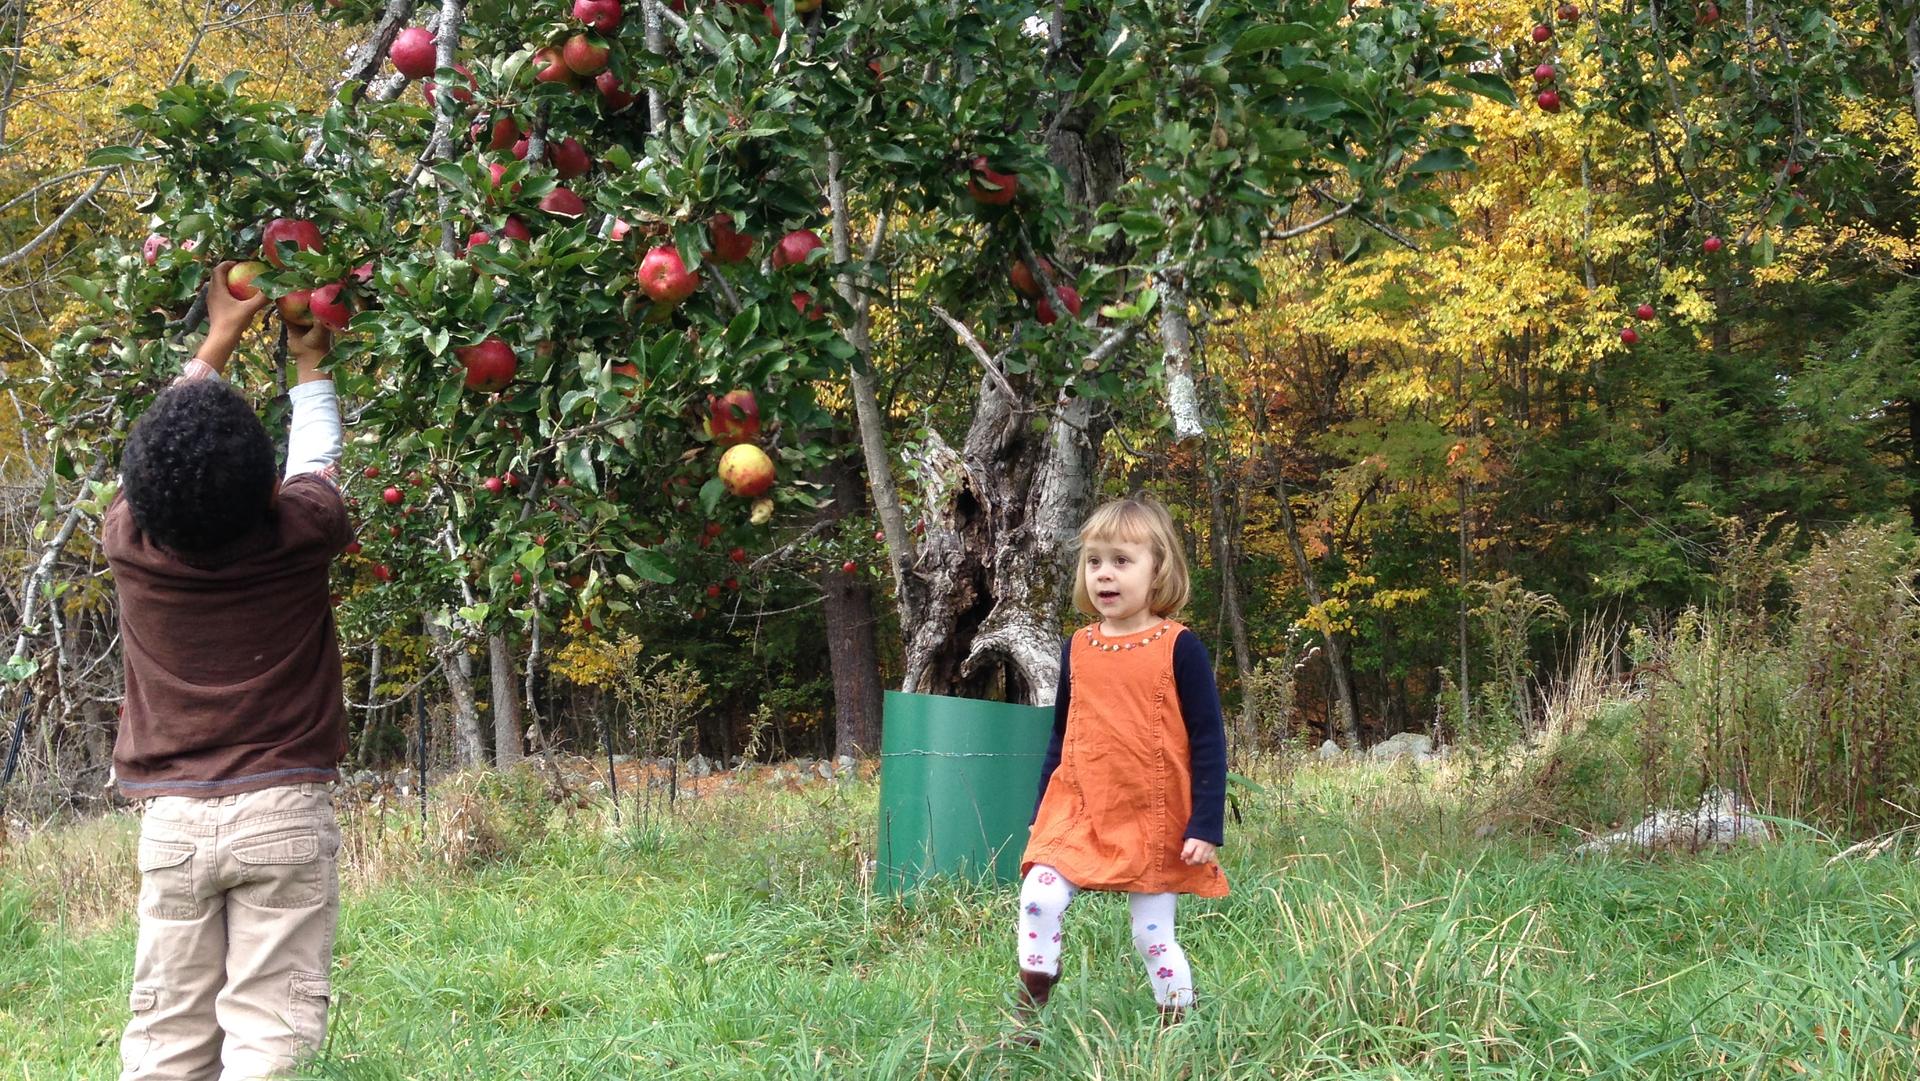 2013 was a banner year for apples in New England and even the old, long-neglected trees at the Thomson farm in Western Massachusetts got caught up in the frenzy.